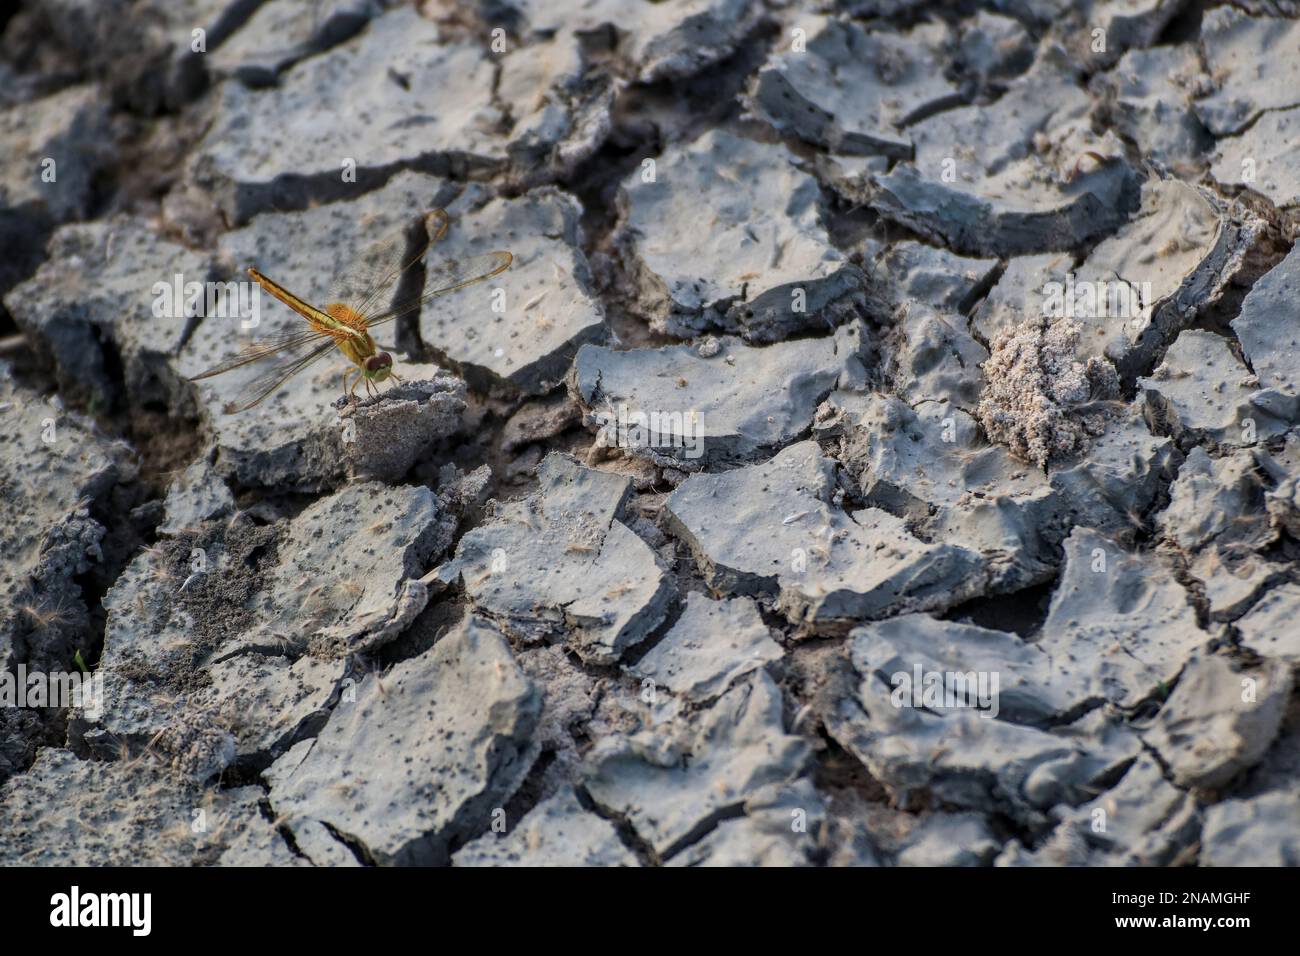 Close-up of dry cracked ground with dragonflies standing. Stock Photo